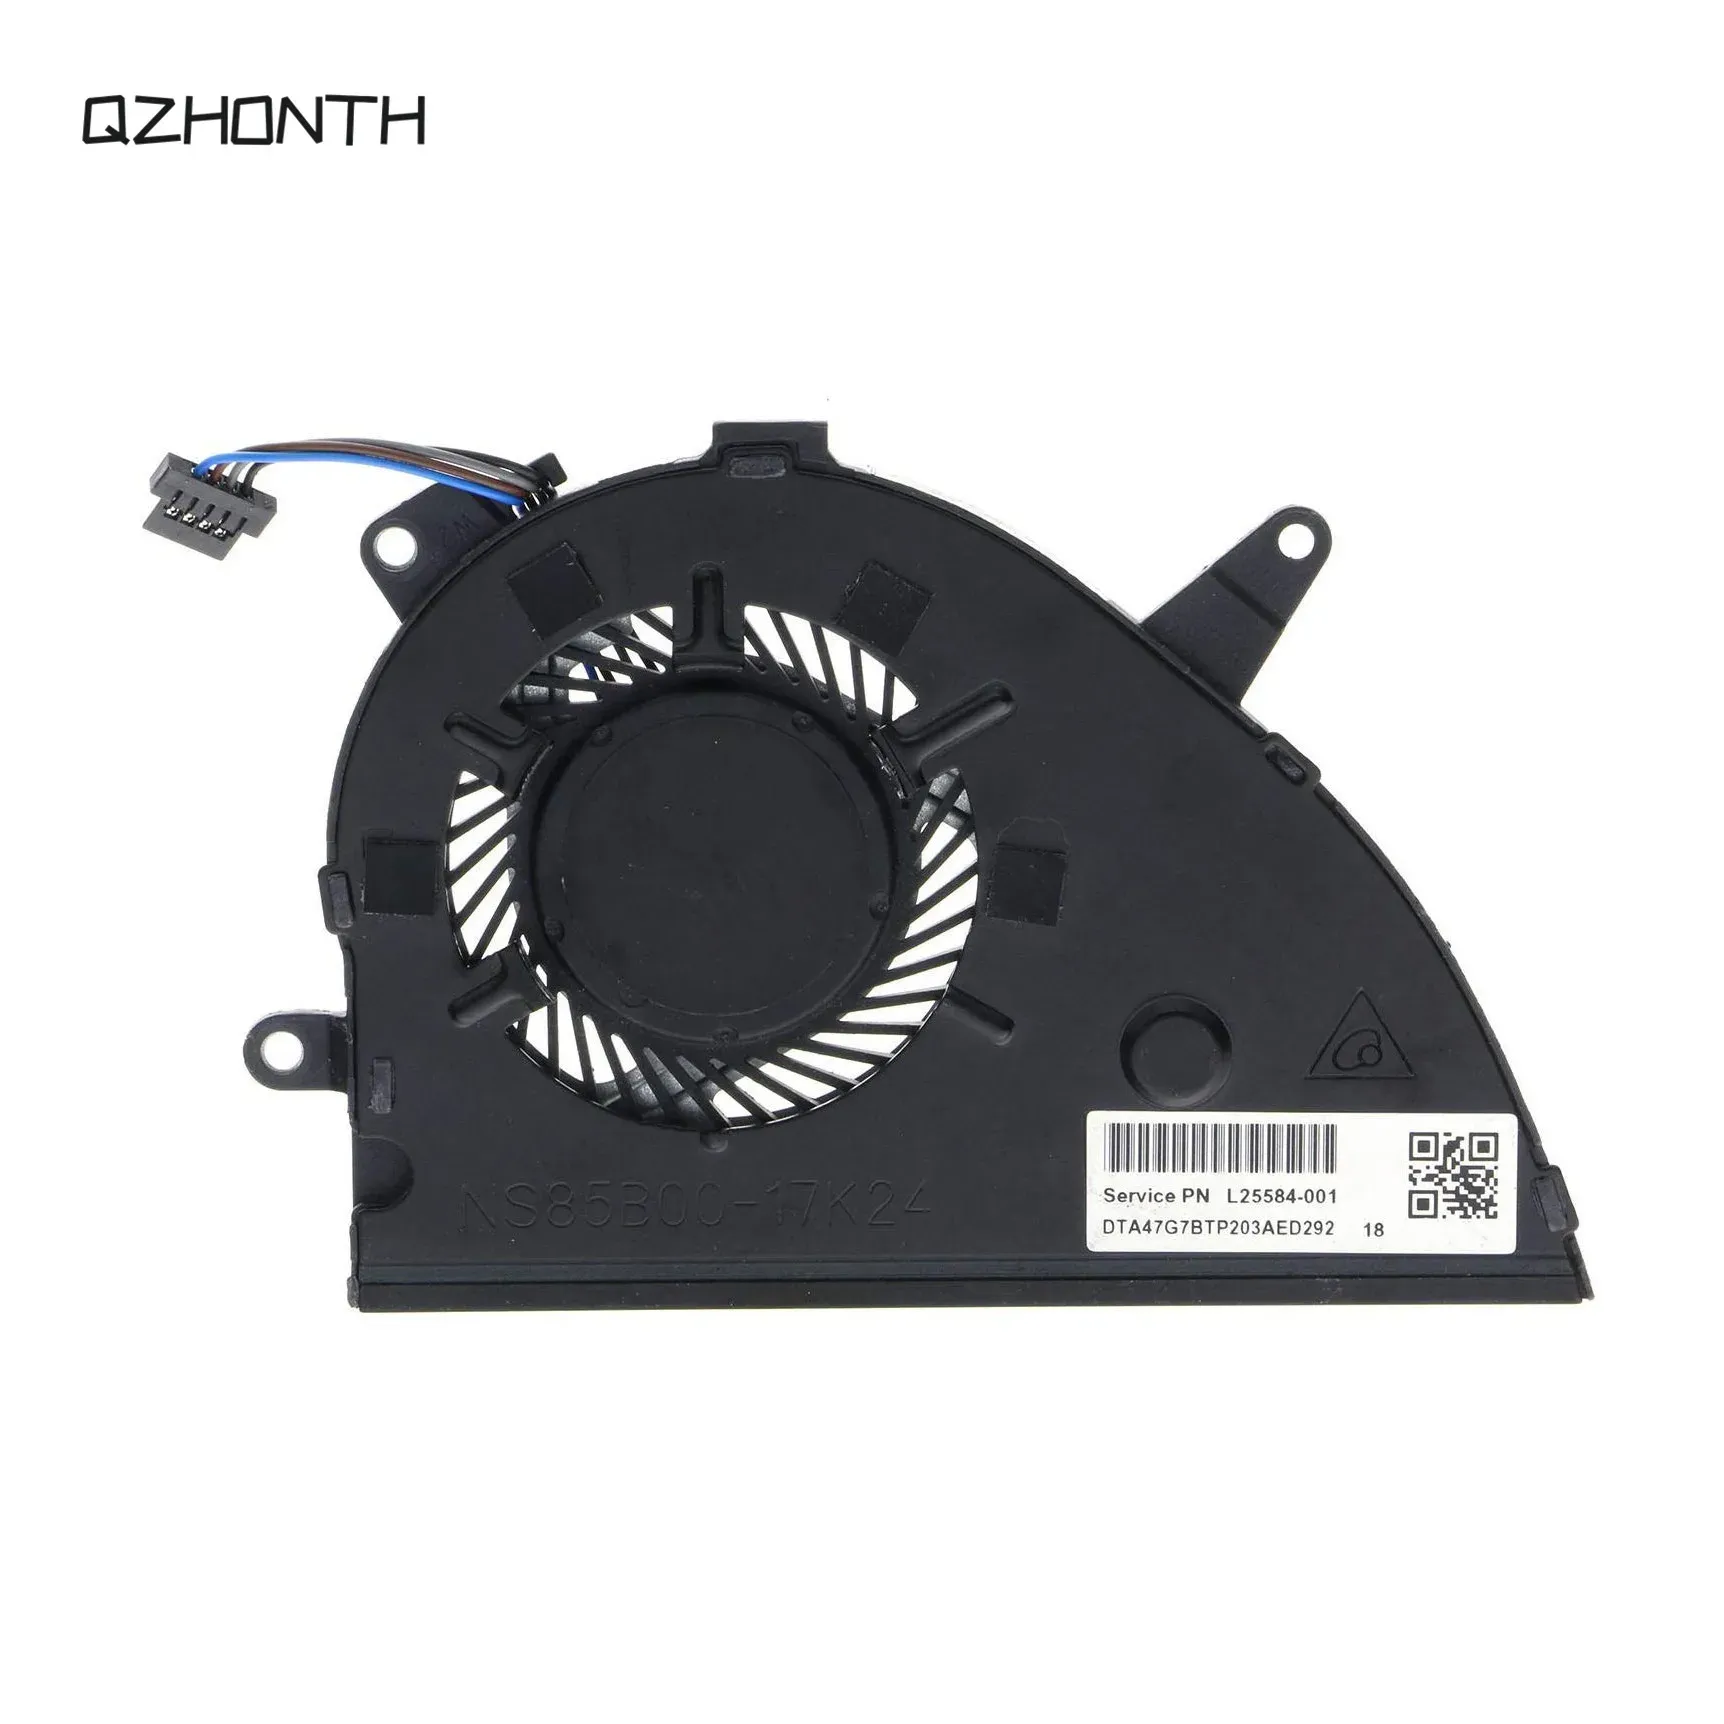 Pads Laptop New CPU Cooling Fan For HP Pavilion 15CS 15CW Series L25584001